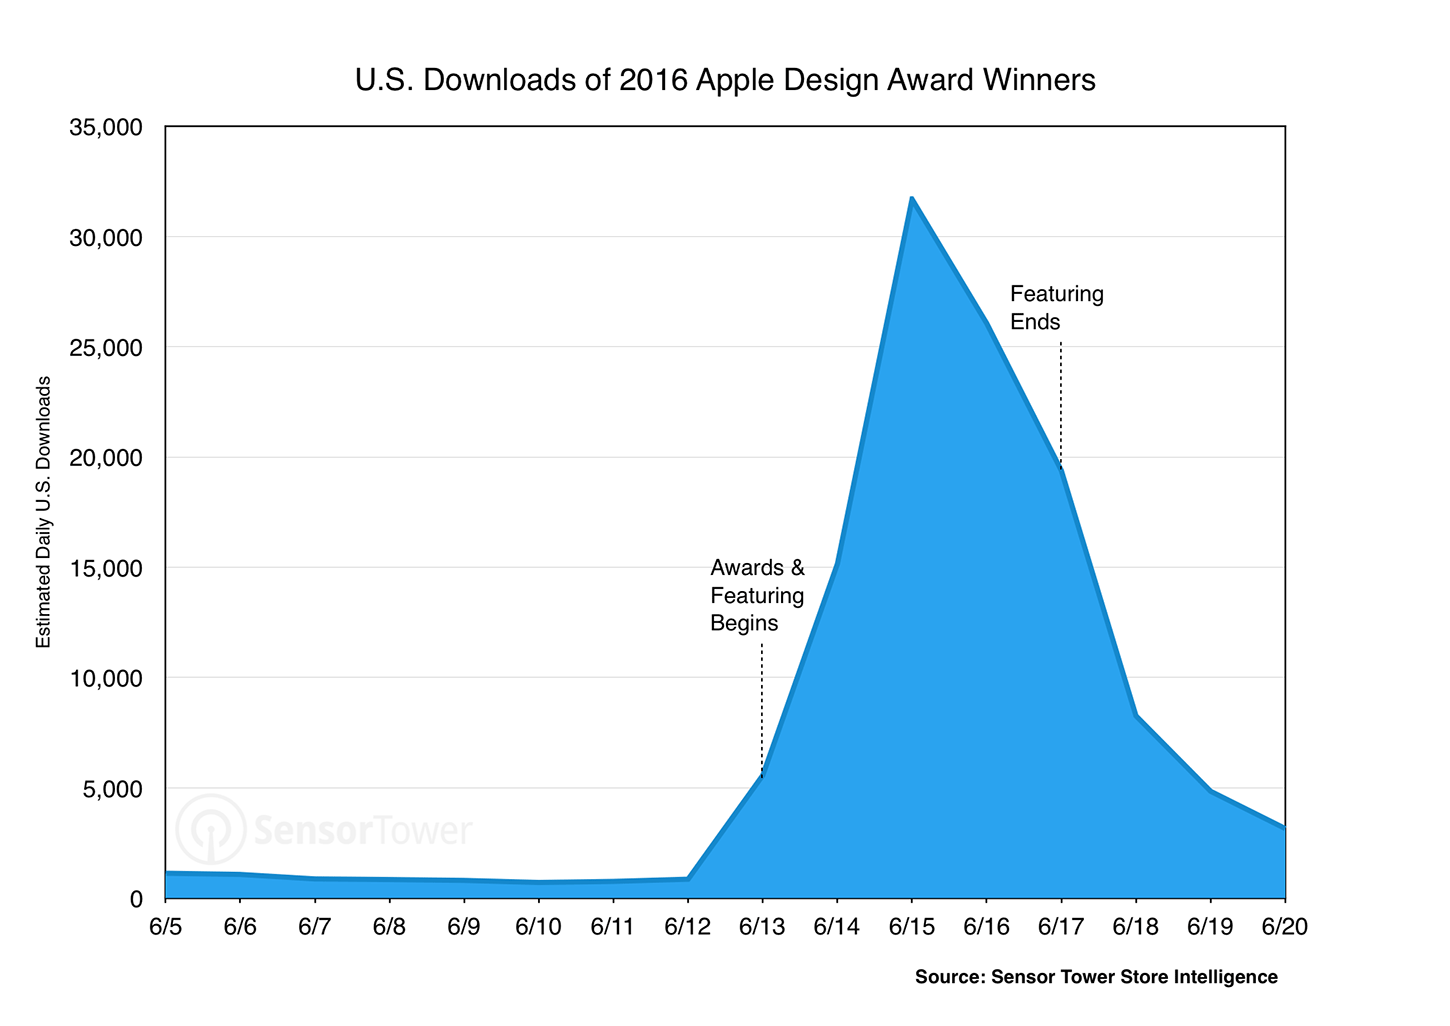 Combined Download Chart for the 2016 Apple Design Award Winners